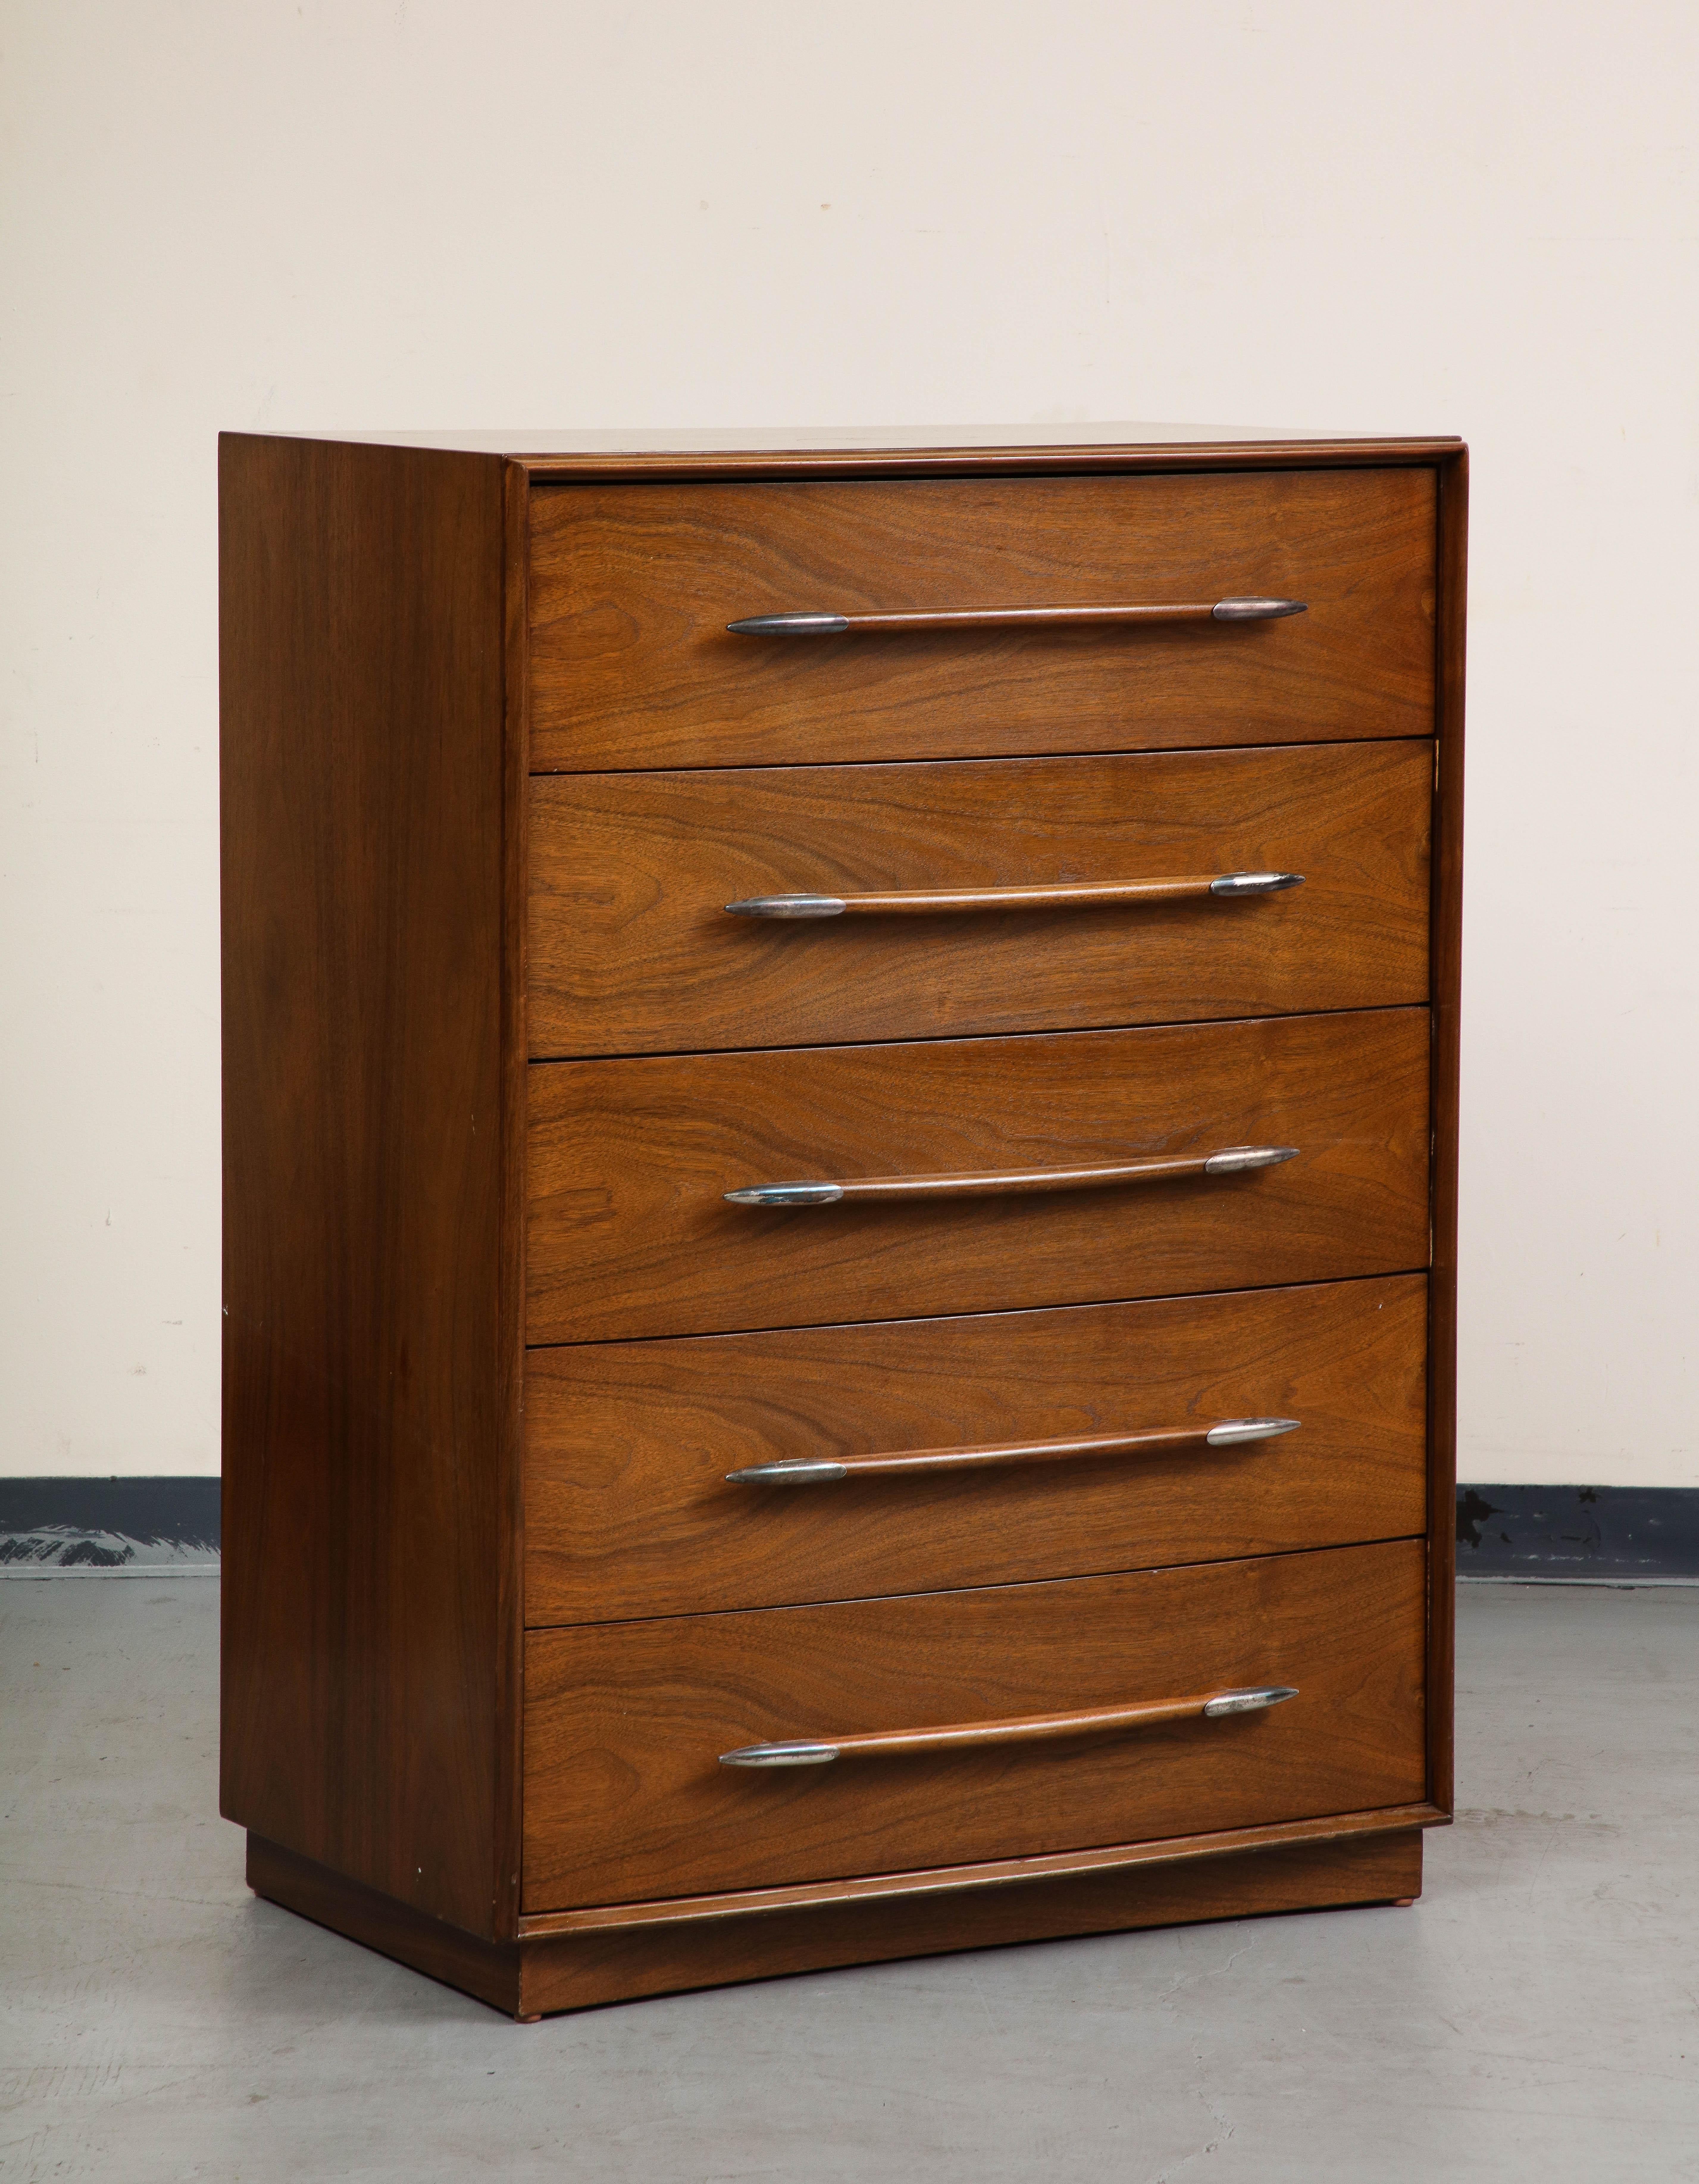 Classic midcentury walnut high bureau dresser with five drawers, featuring unique spear-shaped pulls with nickel-tipped ends. 

Designed by T.H. Robsjohn-Gibbings for The Widdicomb Furniture Company, 1950s. 

47